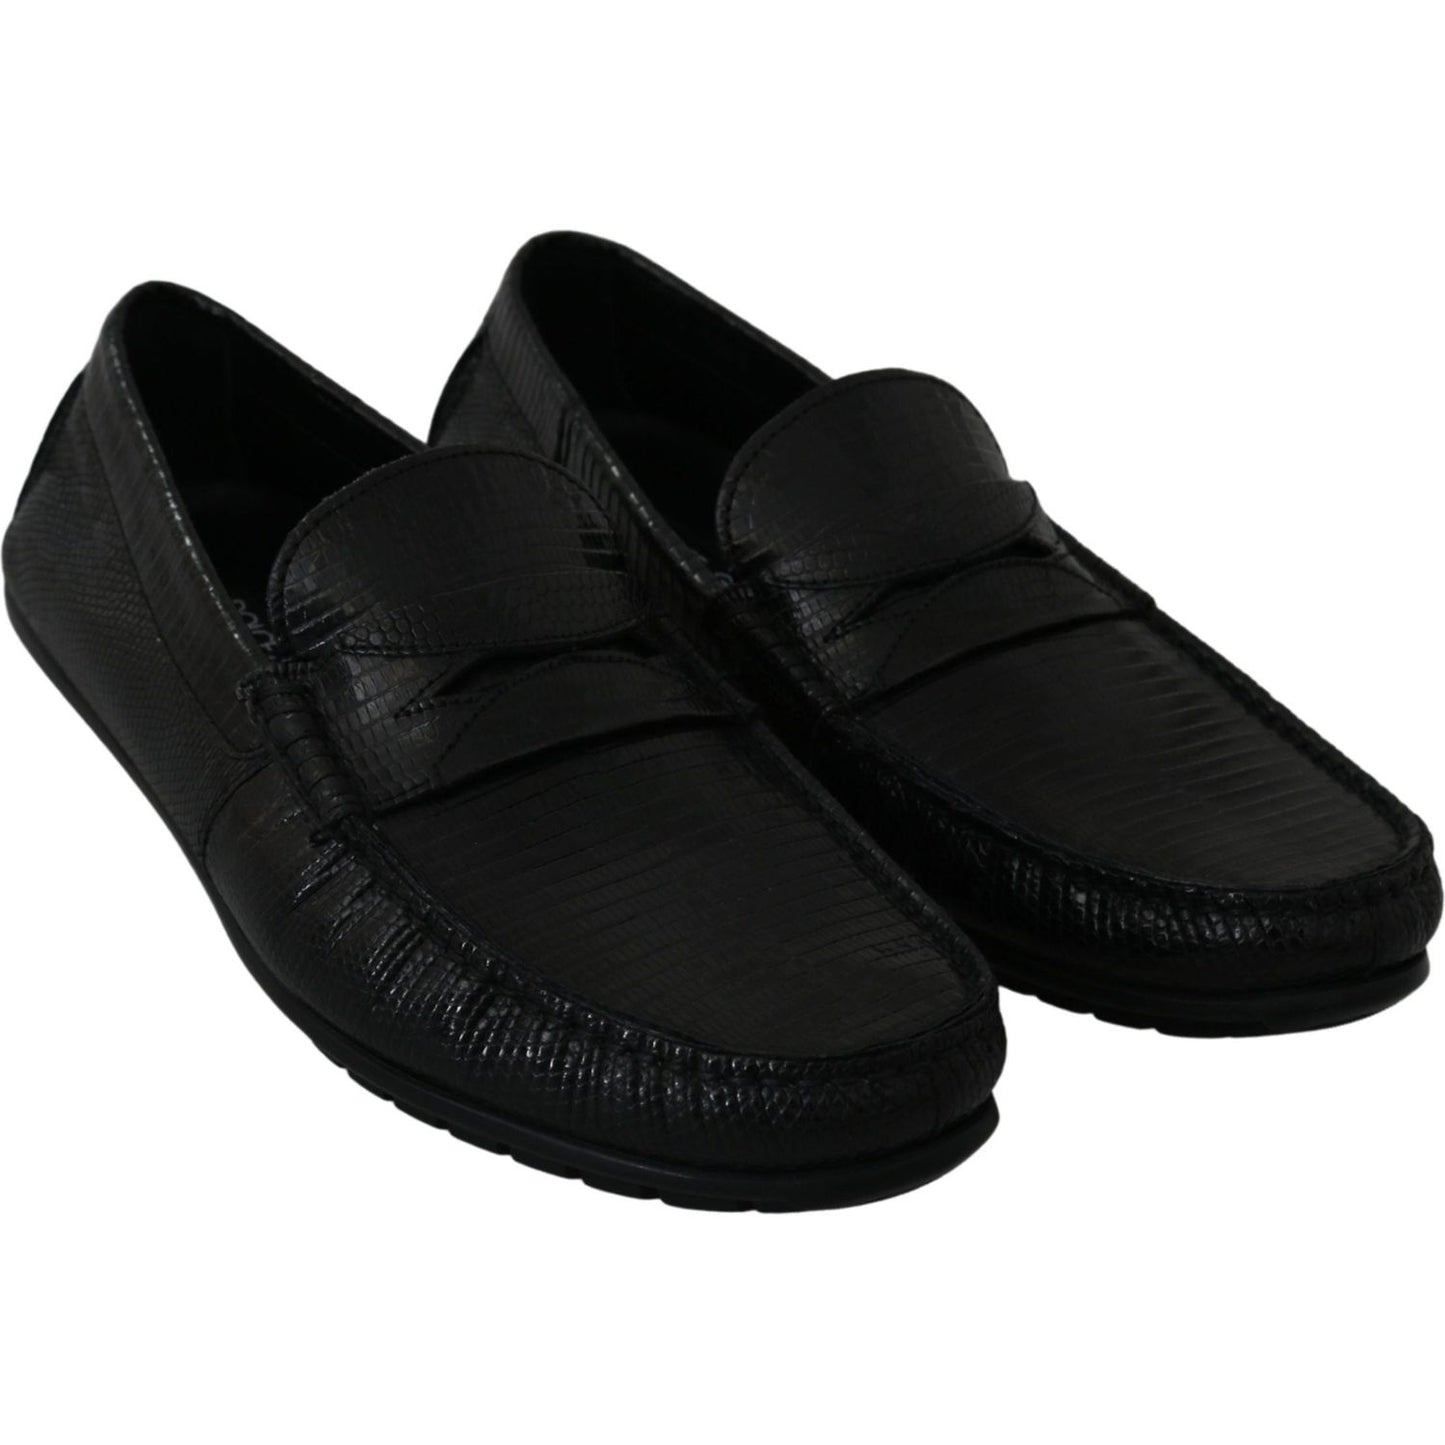 Exquisite Black Lizard Leather Loafers Dolce & Gabbana